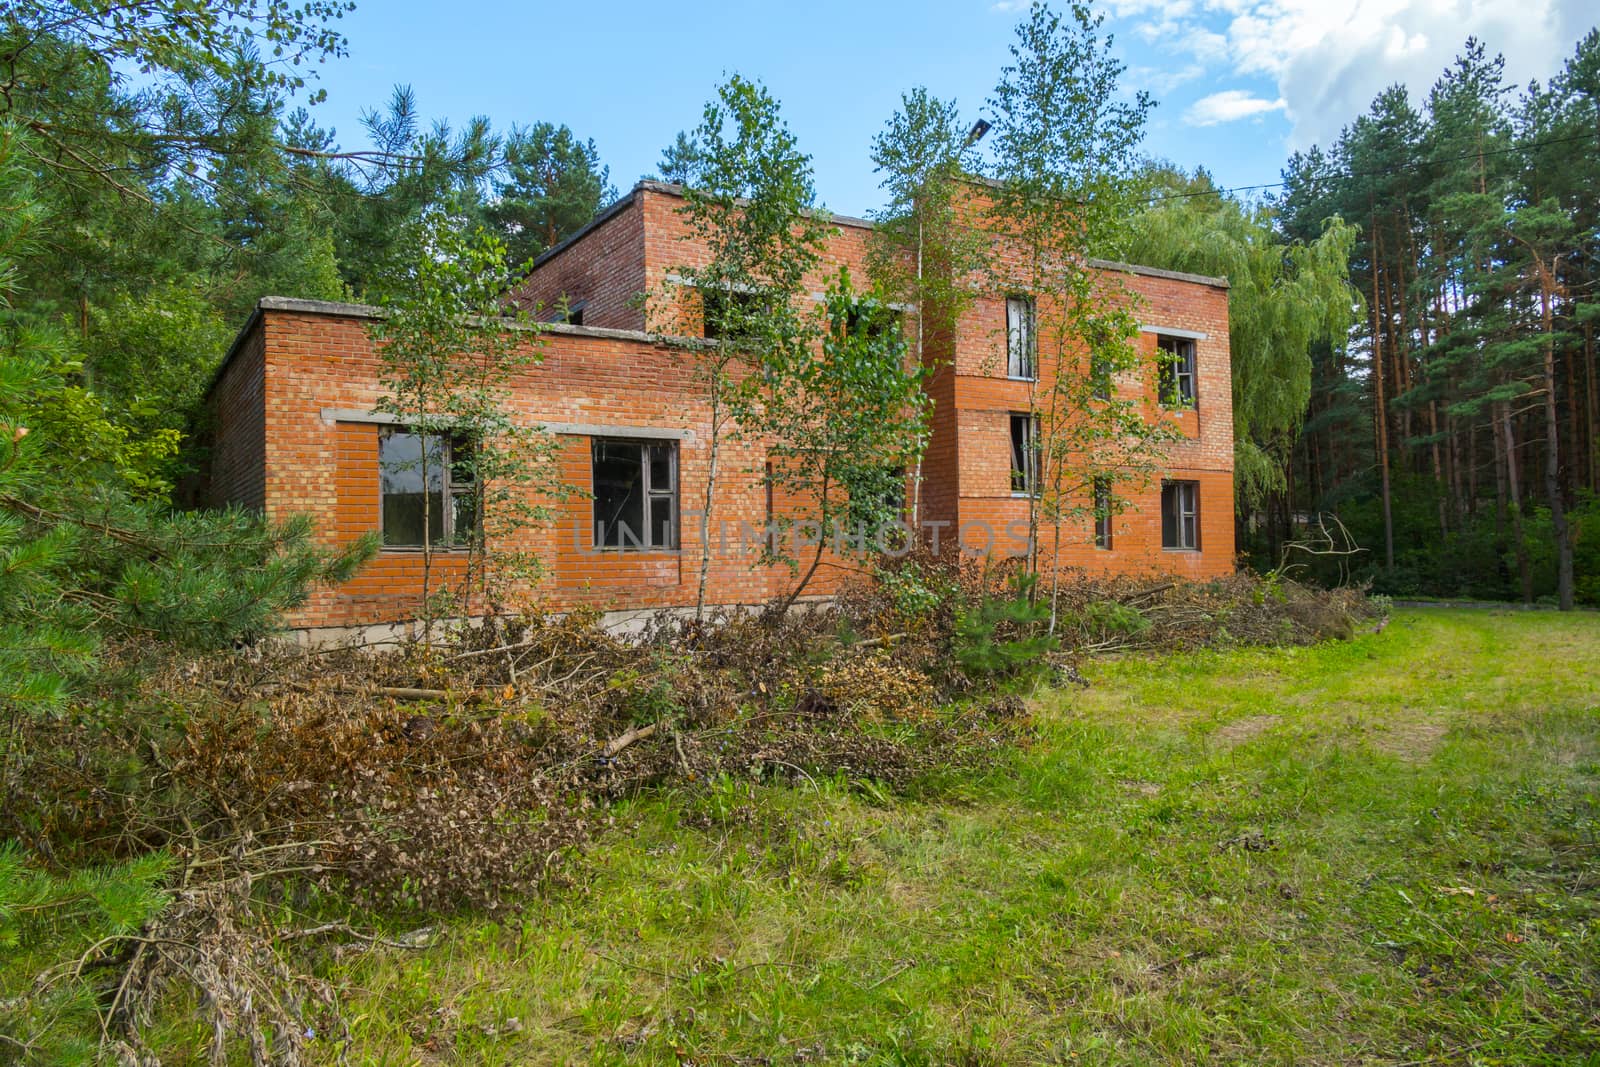 a brick abandoned building in the middle of a forest glade surrounded by dense forest by Adamchuk